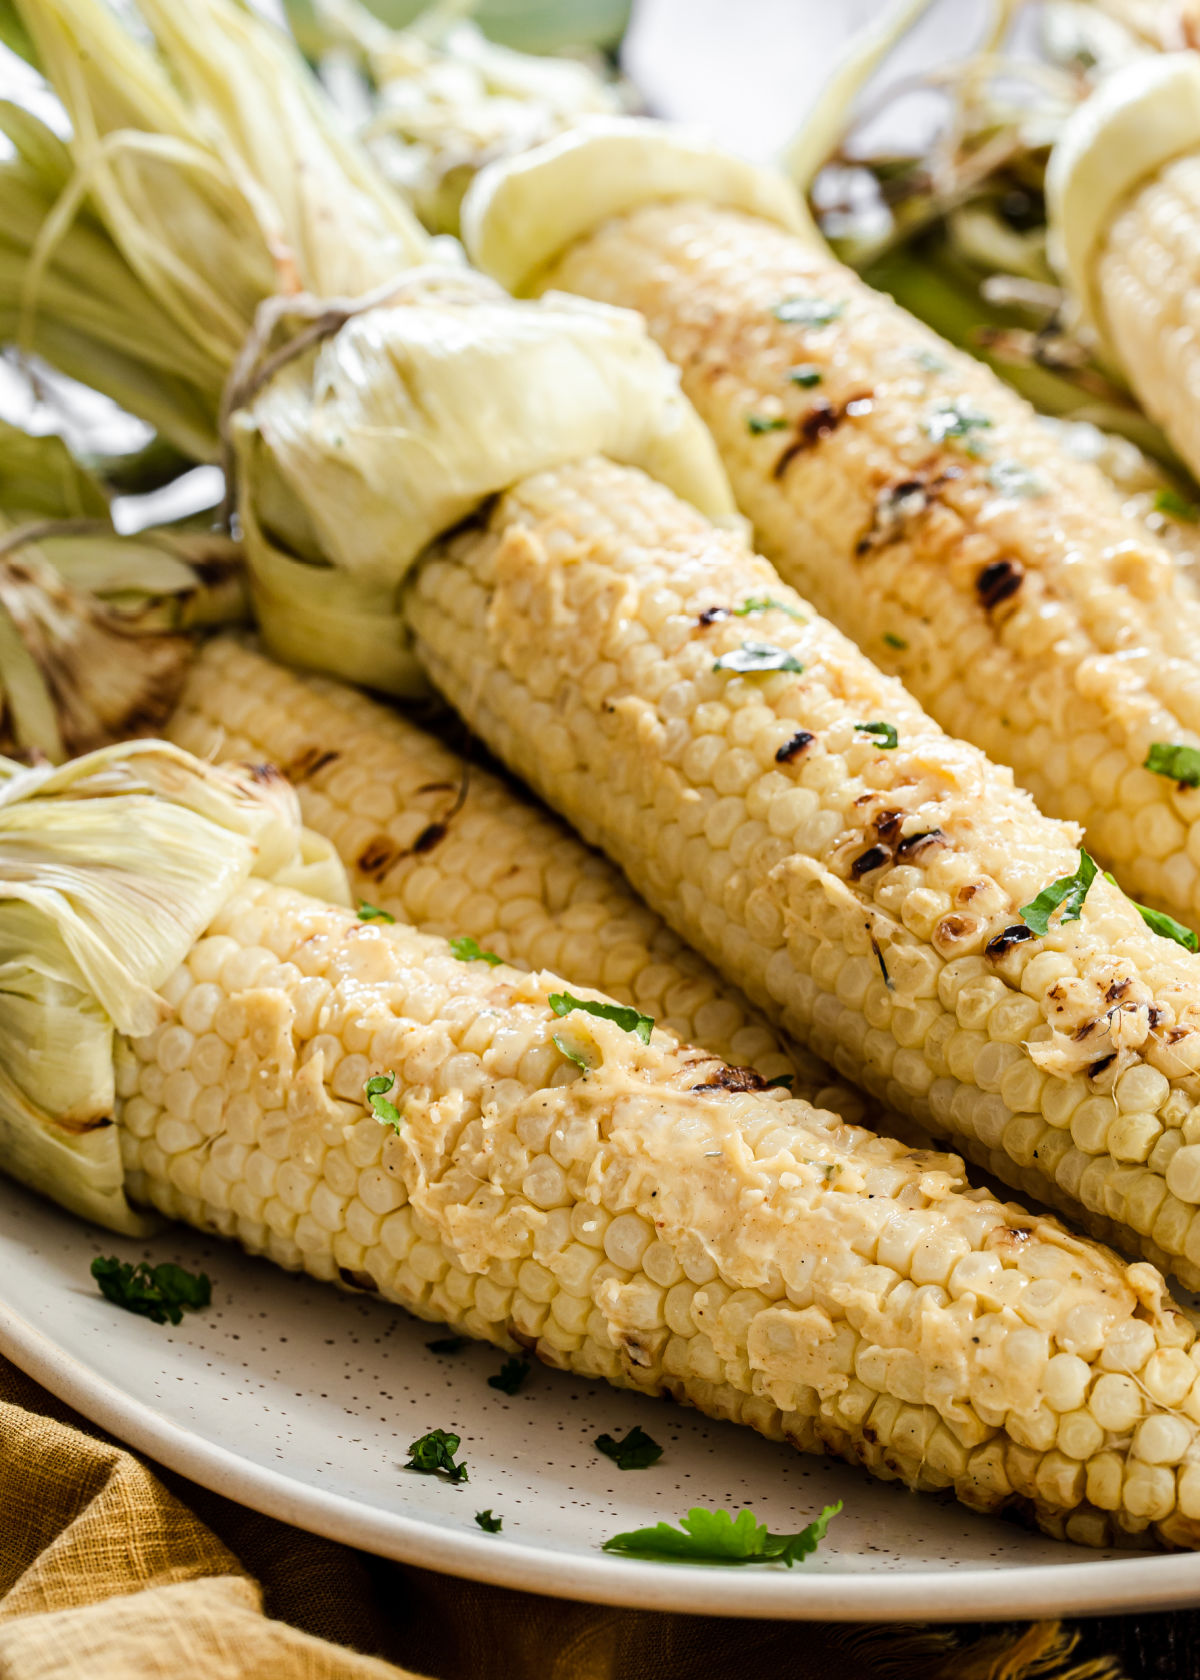 grilled corn with husks pulled back, smothered in butter.